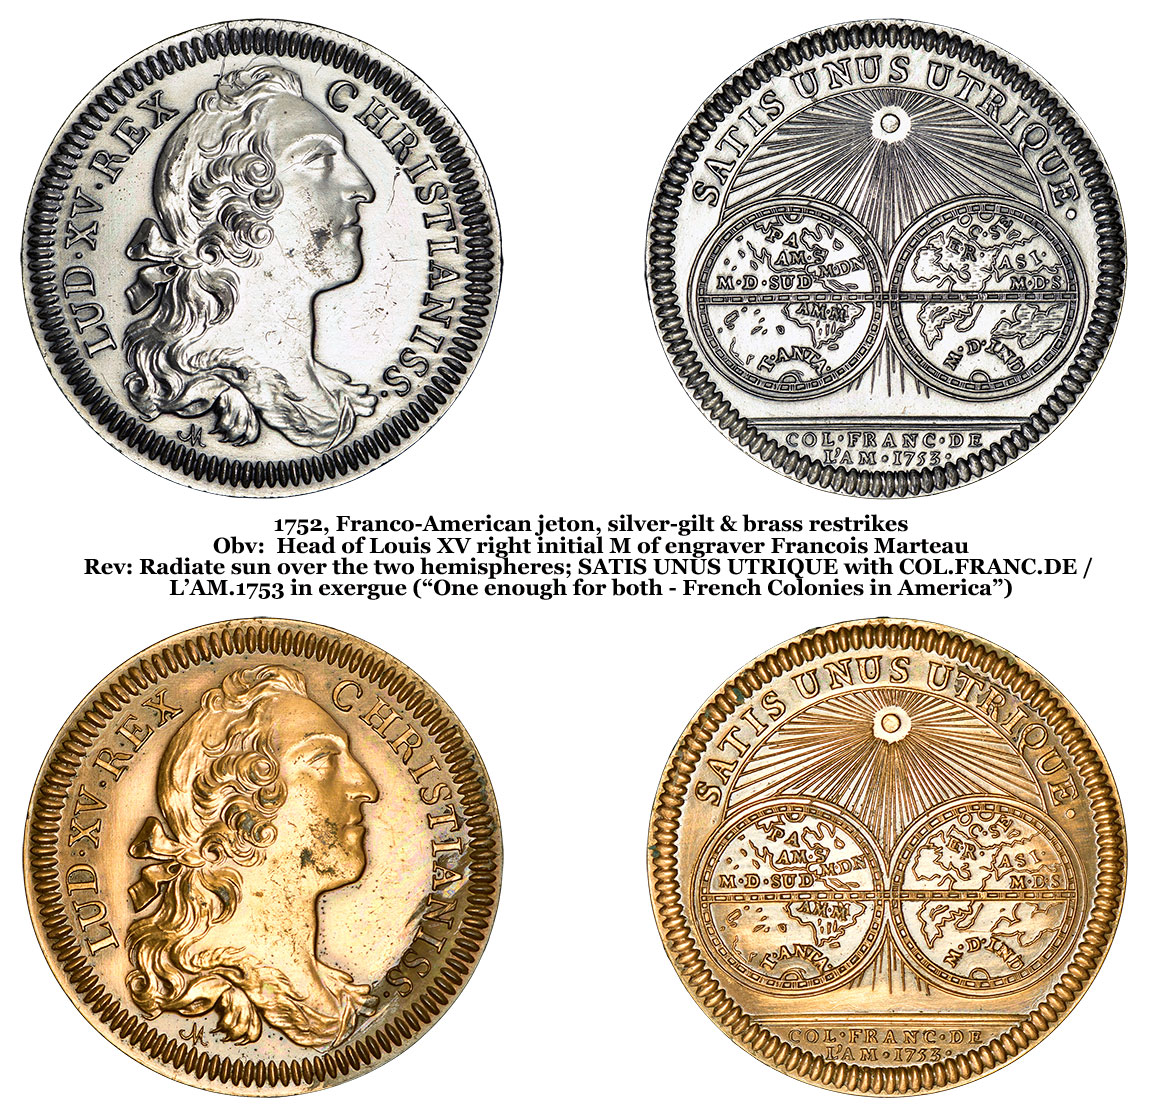 Old Regime France and its Jetons: Pointillist History and Numismatics -  American Numismatic Society